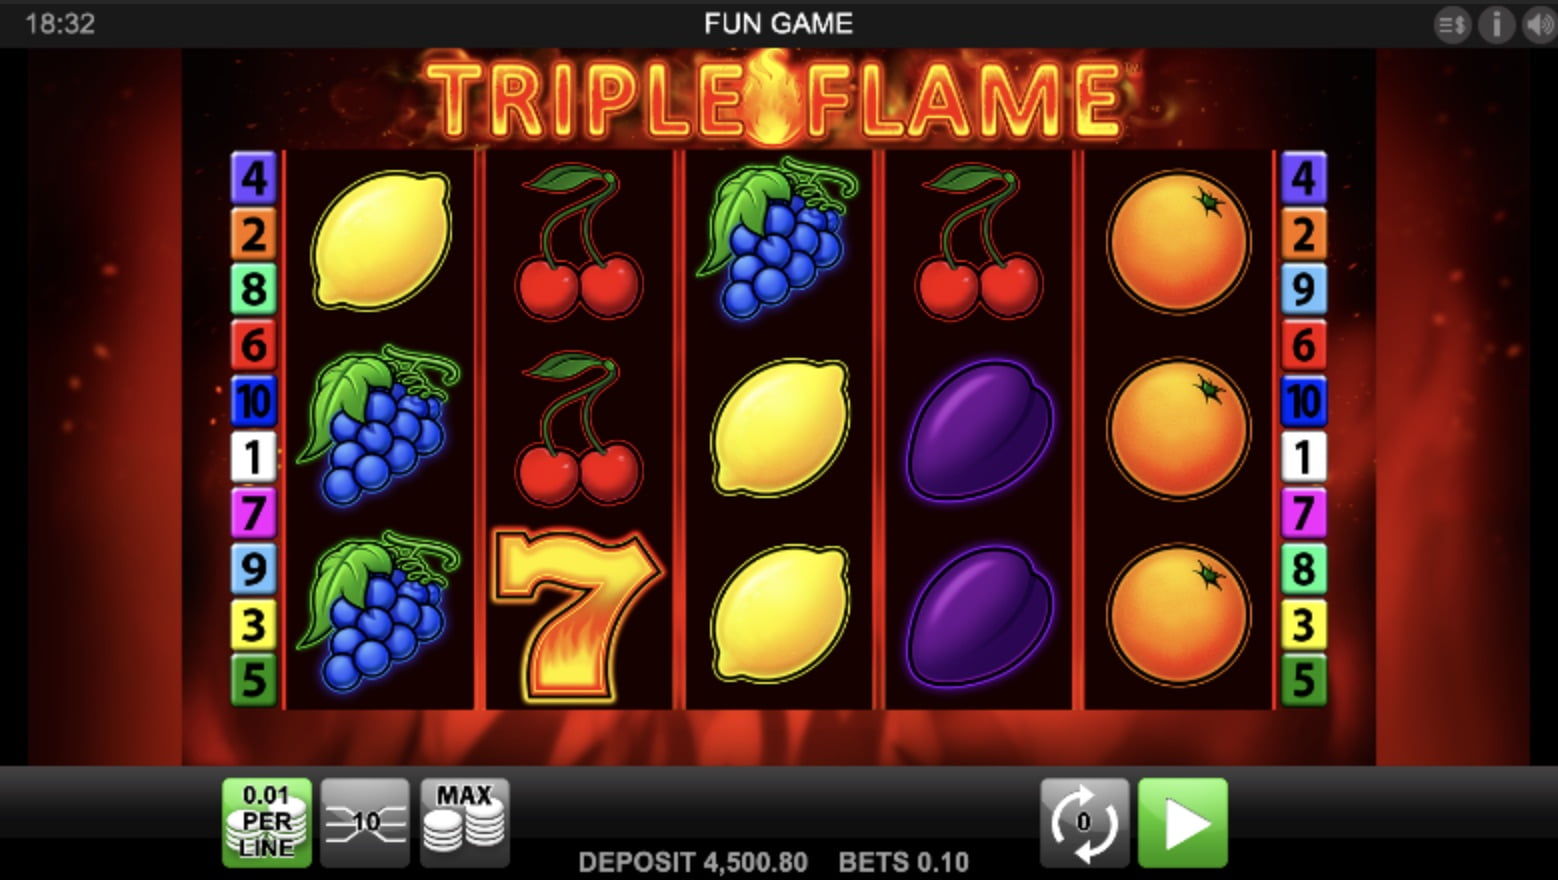 Triple Flame Review